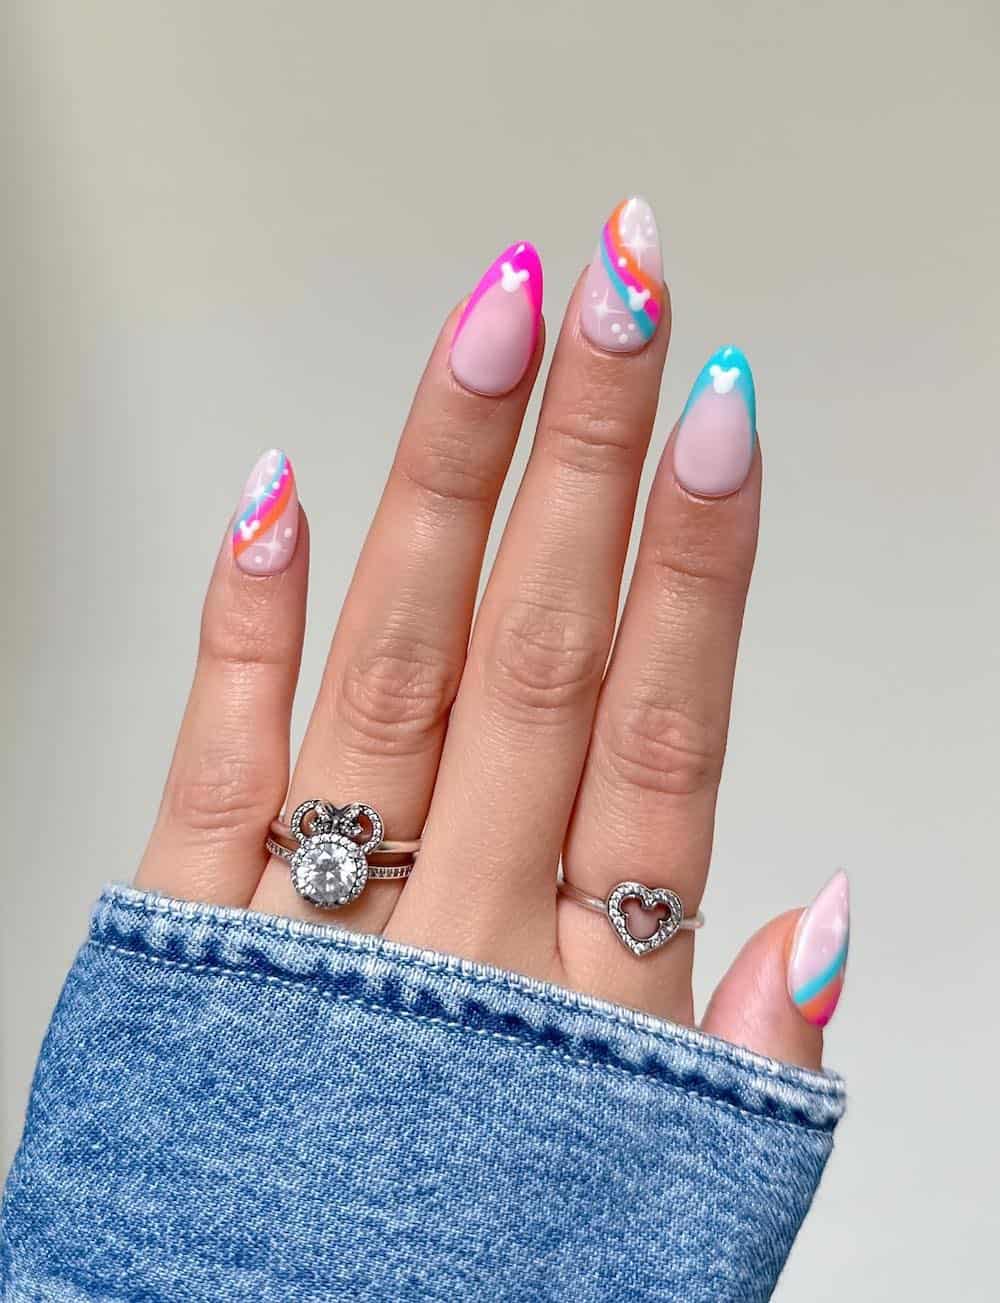 Medium almond nails with a Mickey Mouse design featuring colorful tips and waves